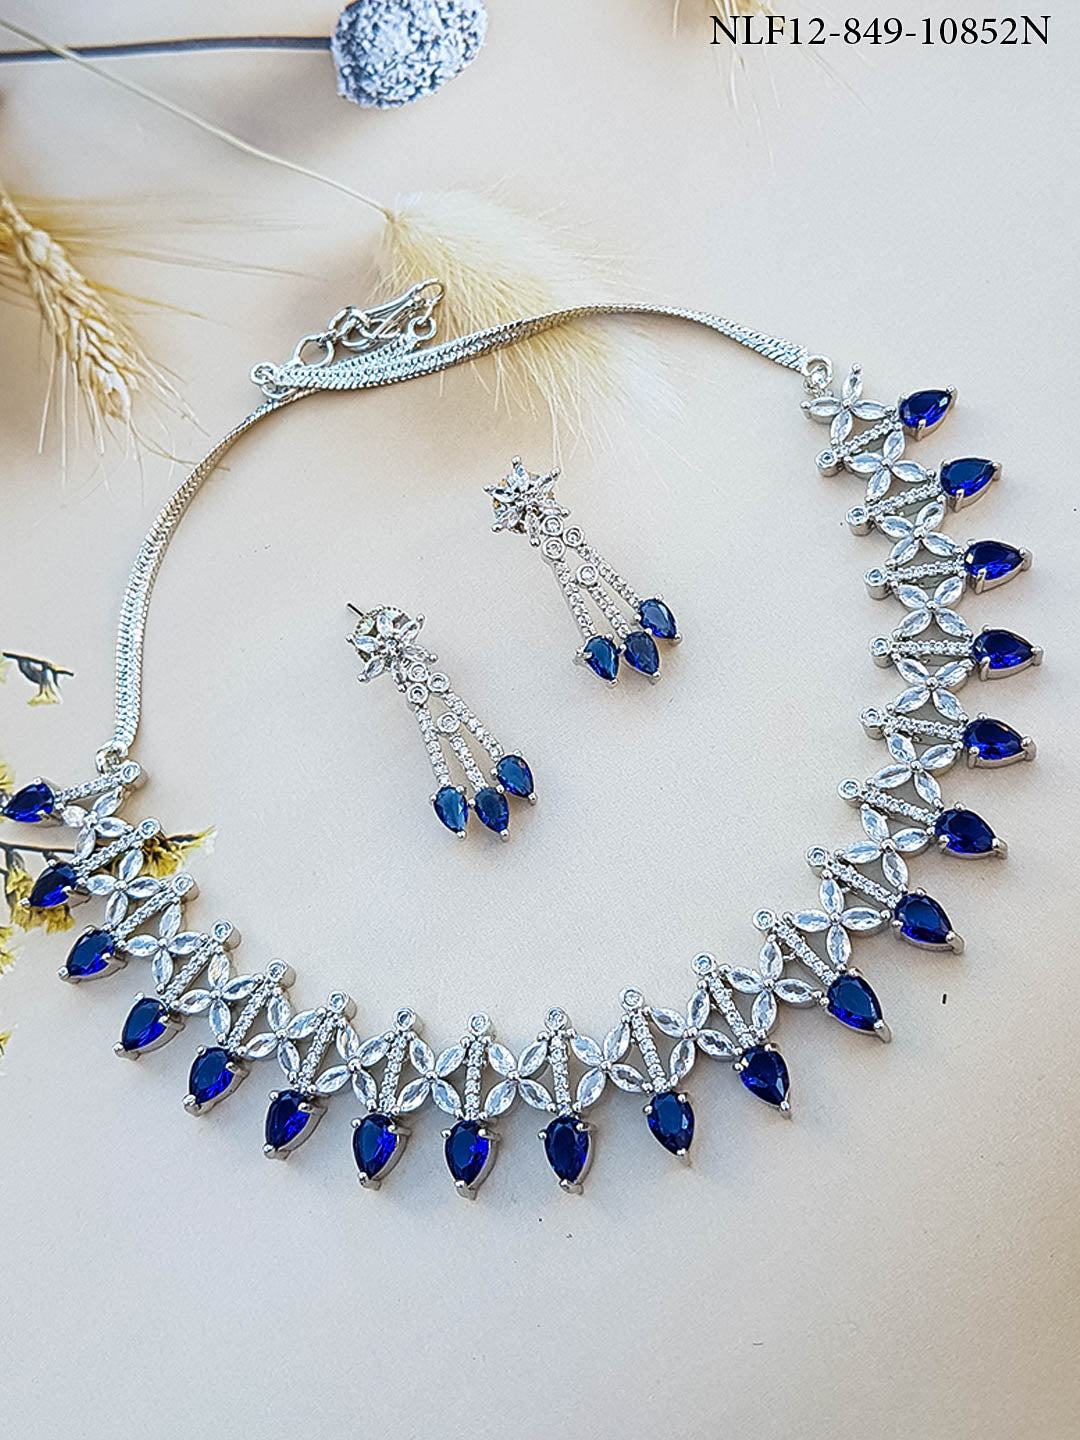 Premium White Gold Plated Sayara Collection designer Necklace set with blue stones 10852N